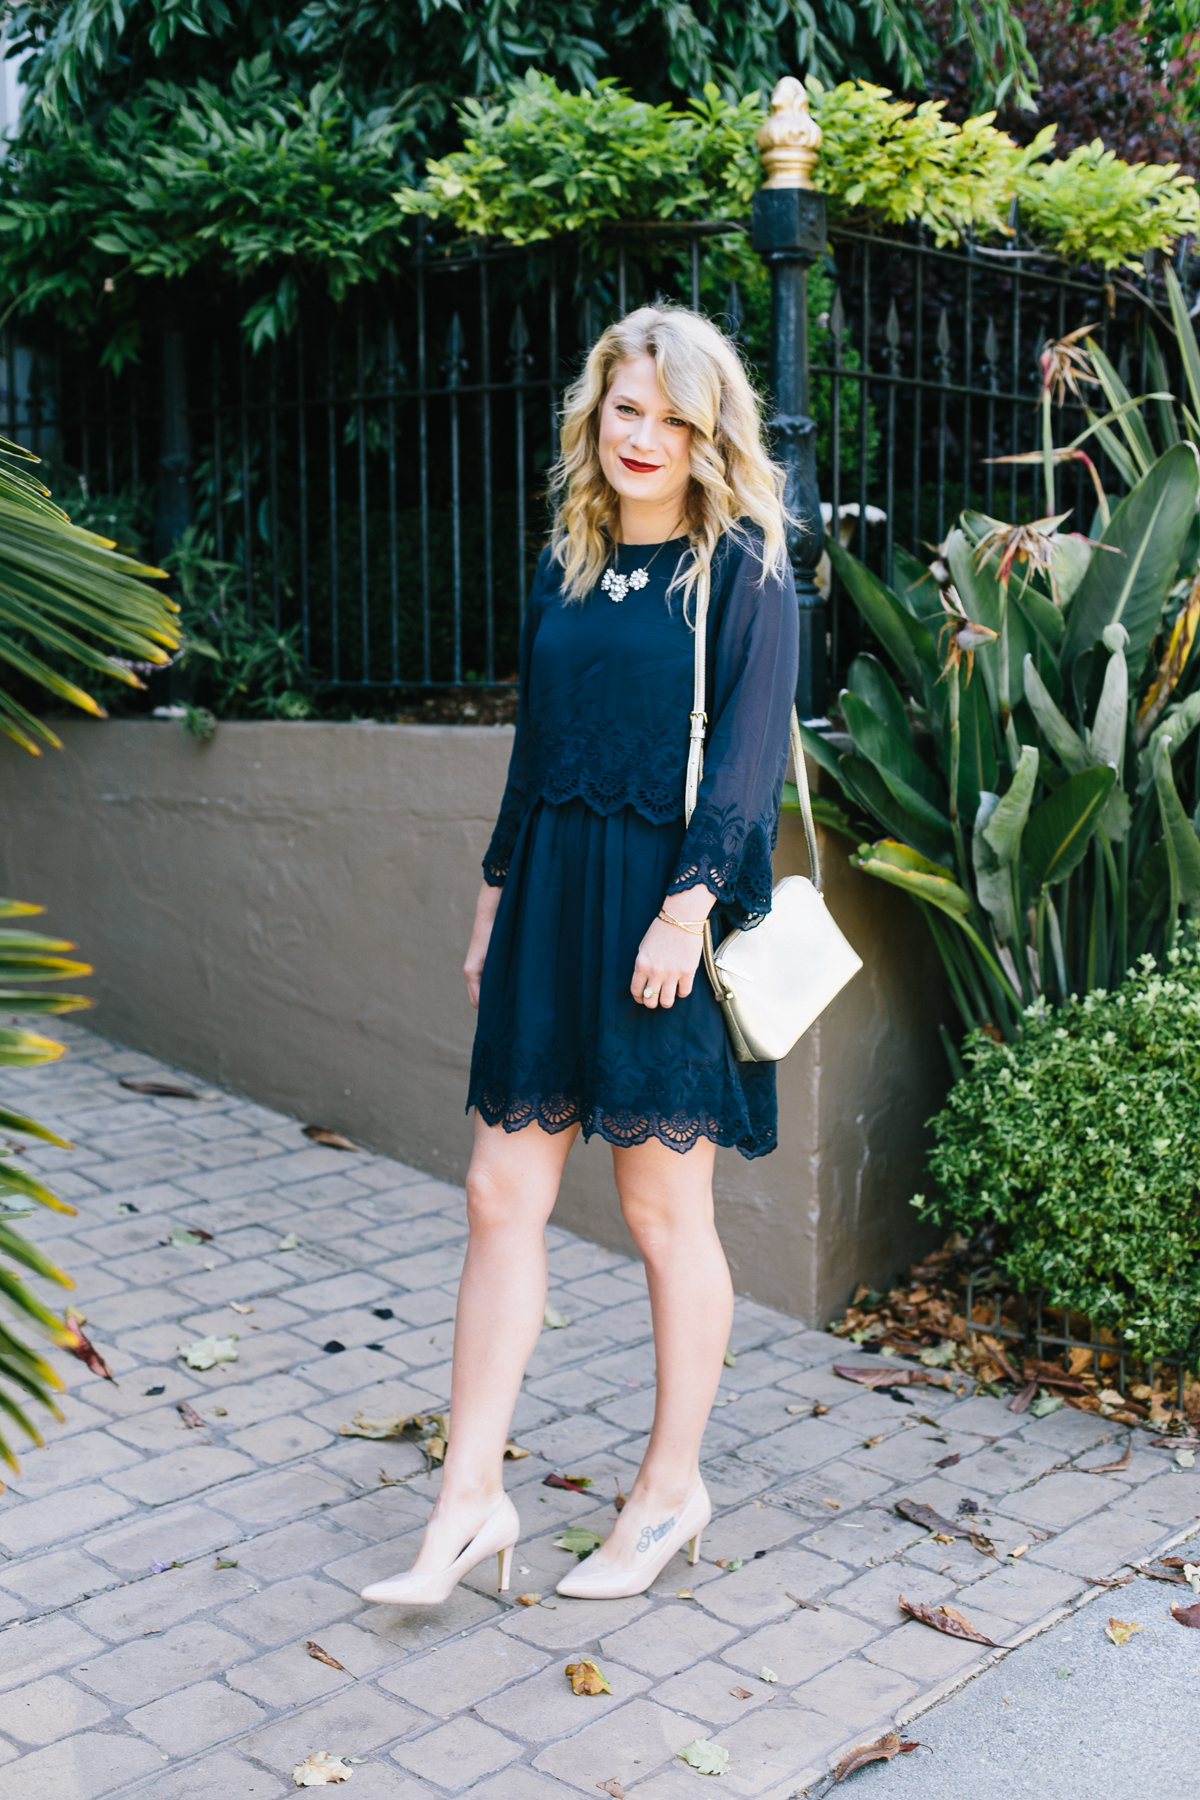 Double Layered Navy Dress from ASOS with Gold Kate Spade Bag.